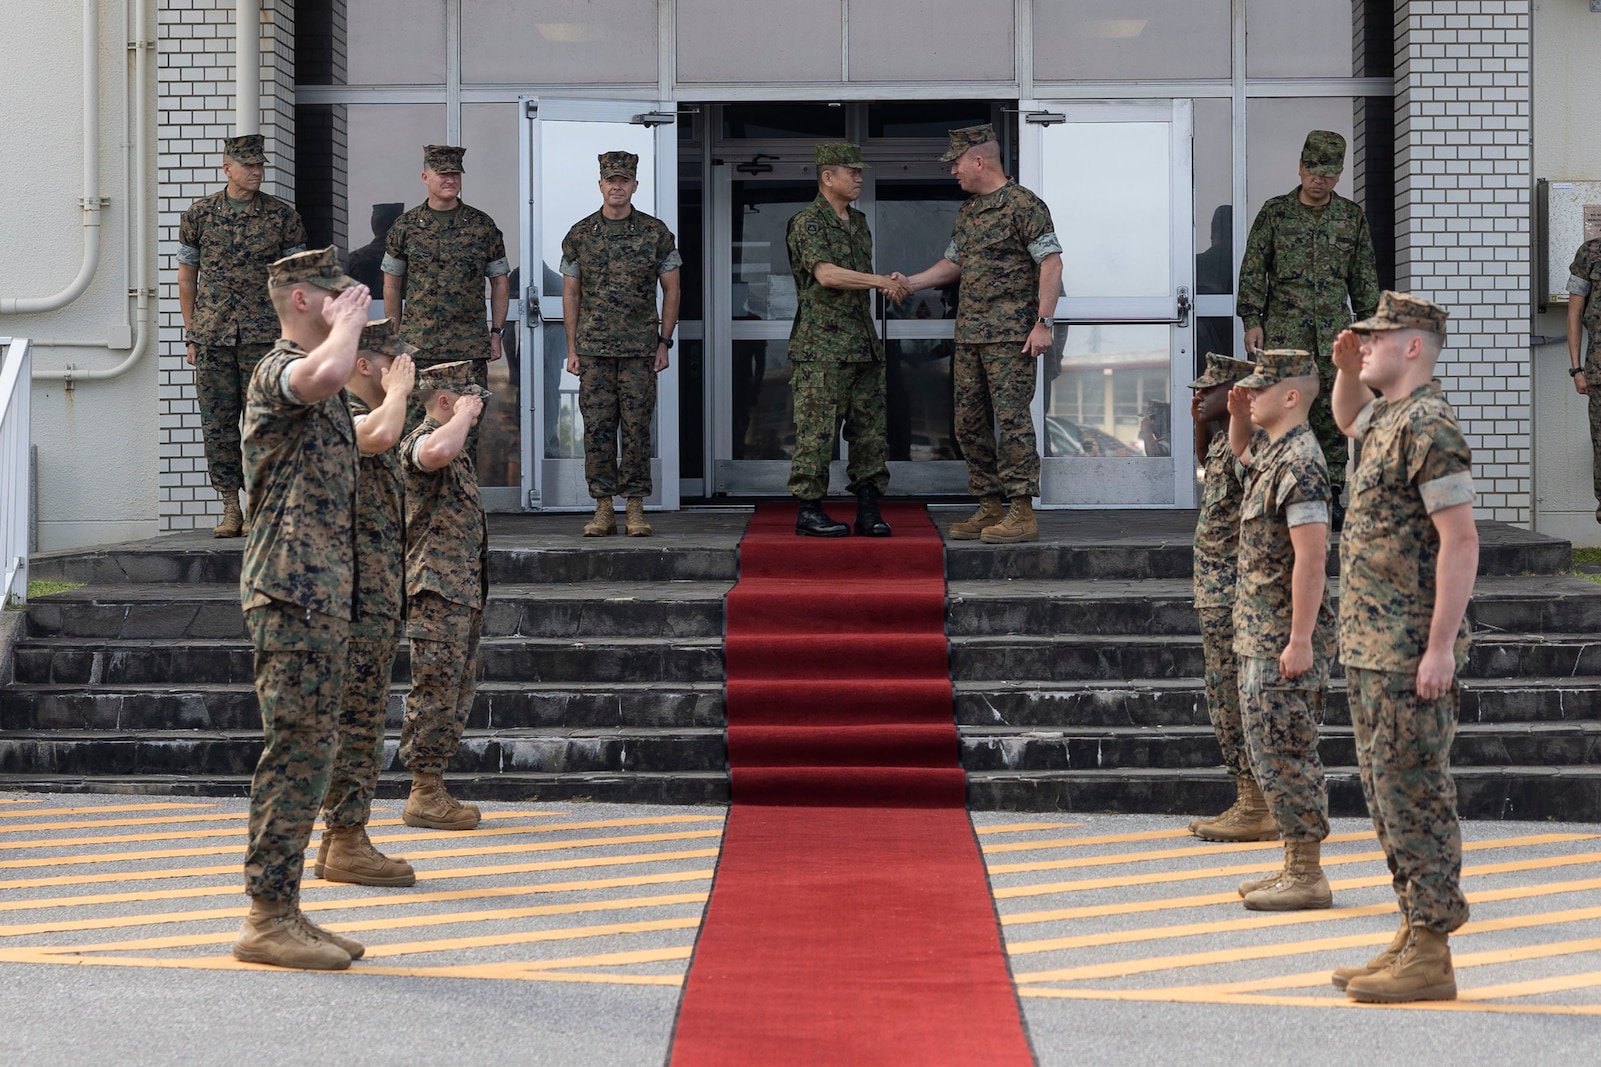 U.S. Marine Corps Lt. Gen. James Beirman, center right, commanding general of III Marine Expeditionary Force, shakes hands with Lt. Gen. Yamane Toshikazu, center, commanding general of Western Army, Japan Ground Self-Defense Force.